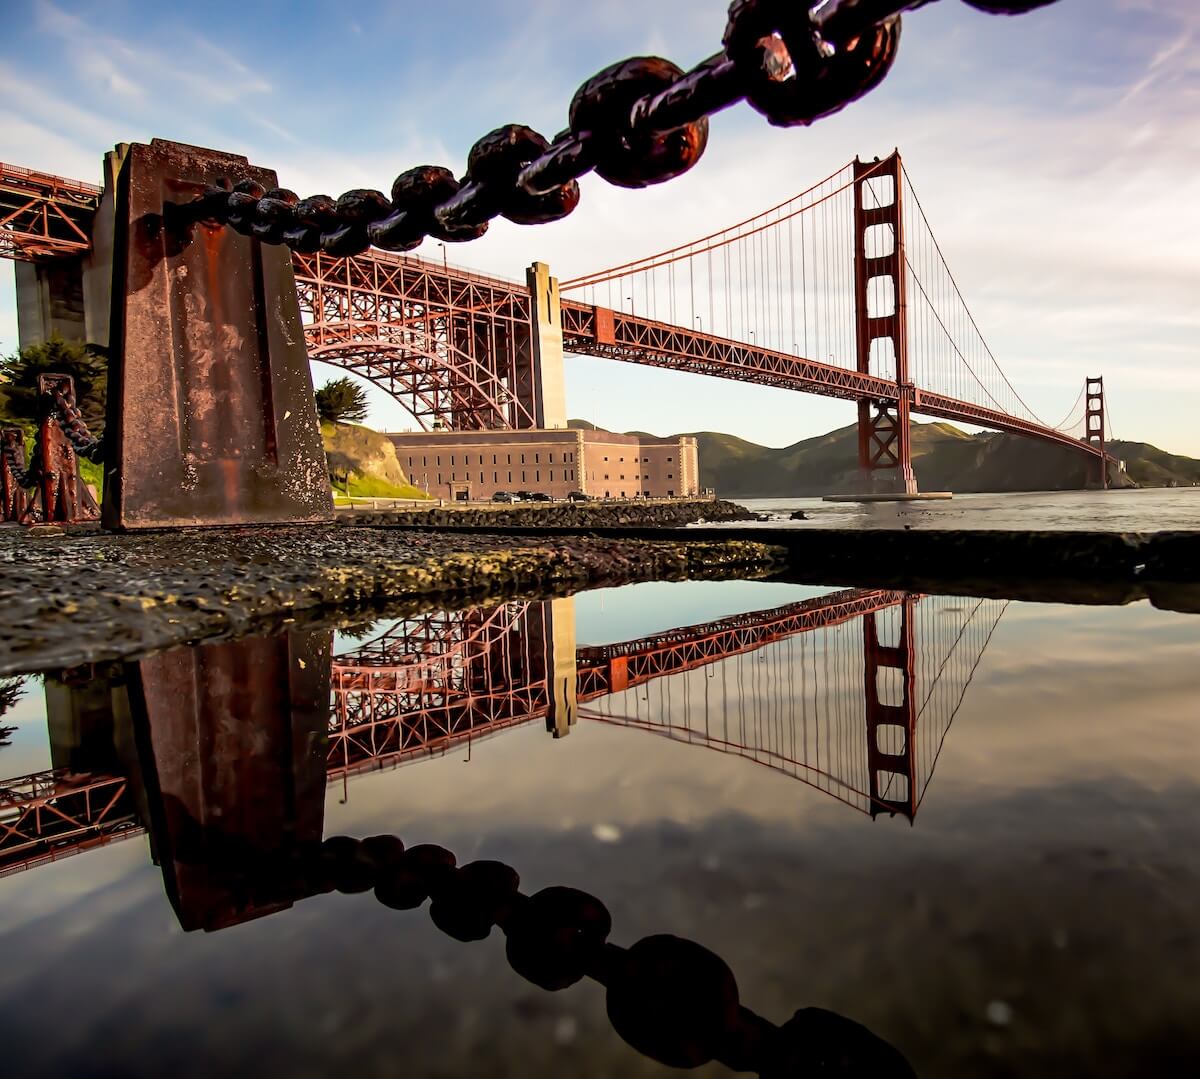 Free Things to do in San Francisco California cover photo of the Golden Gate bridge